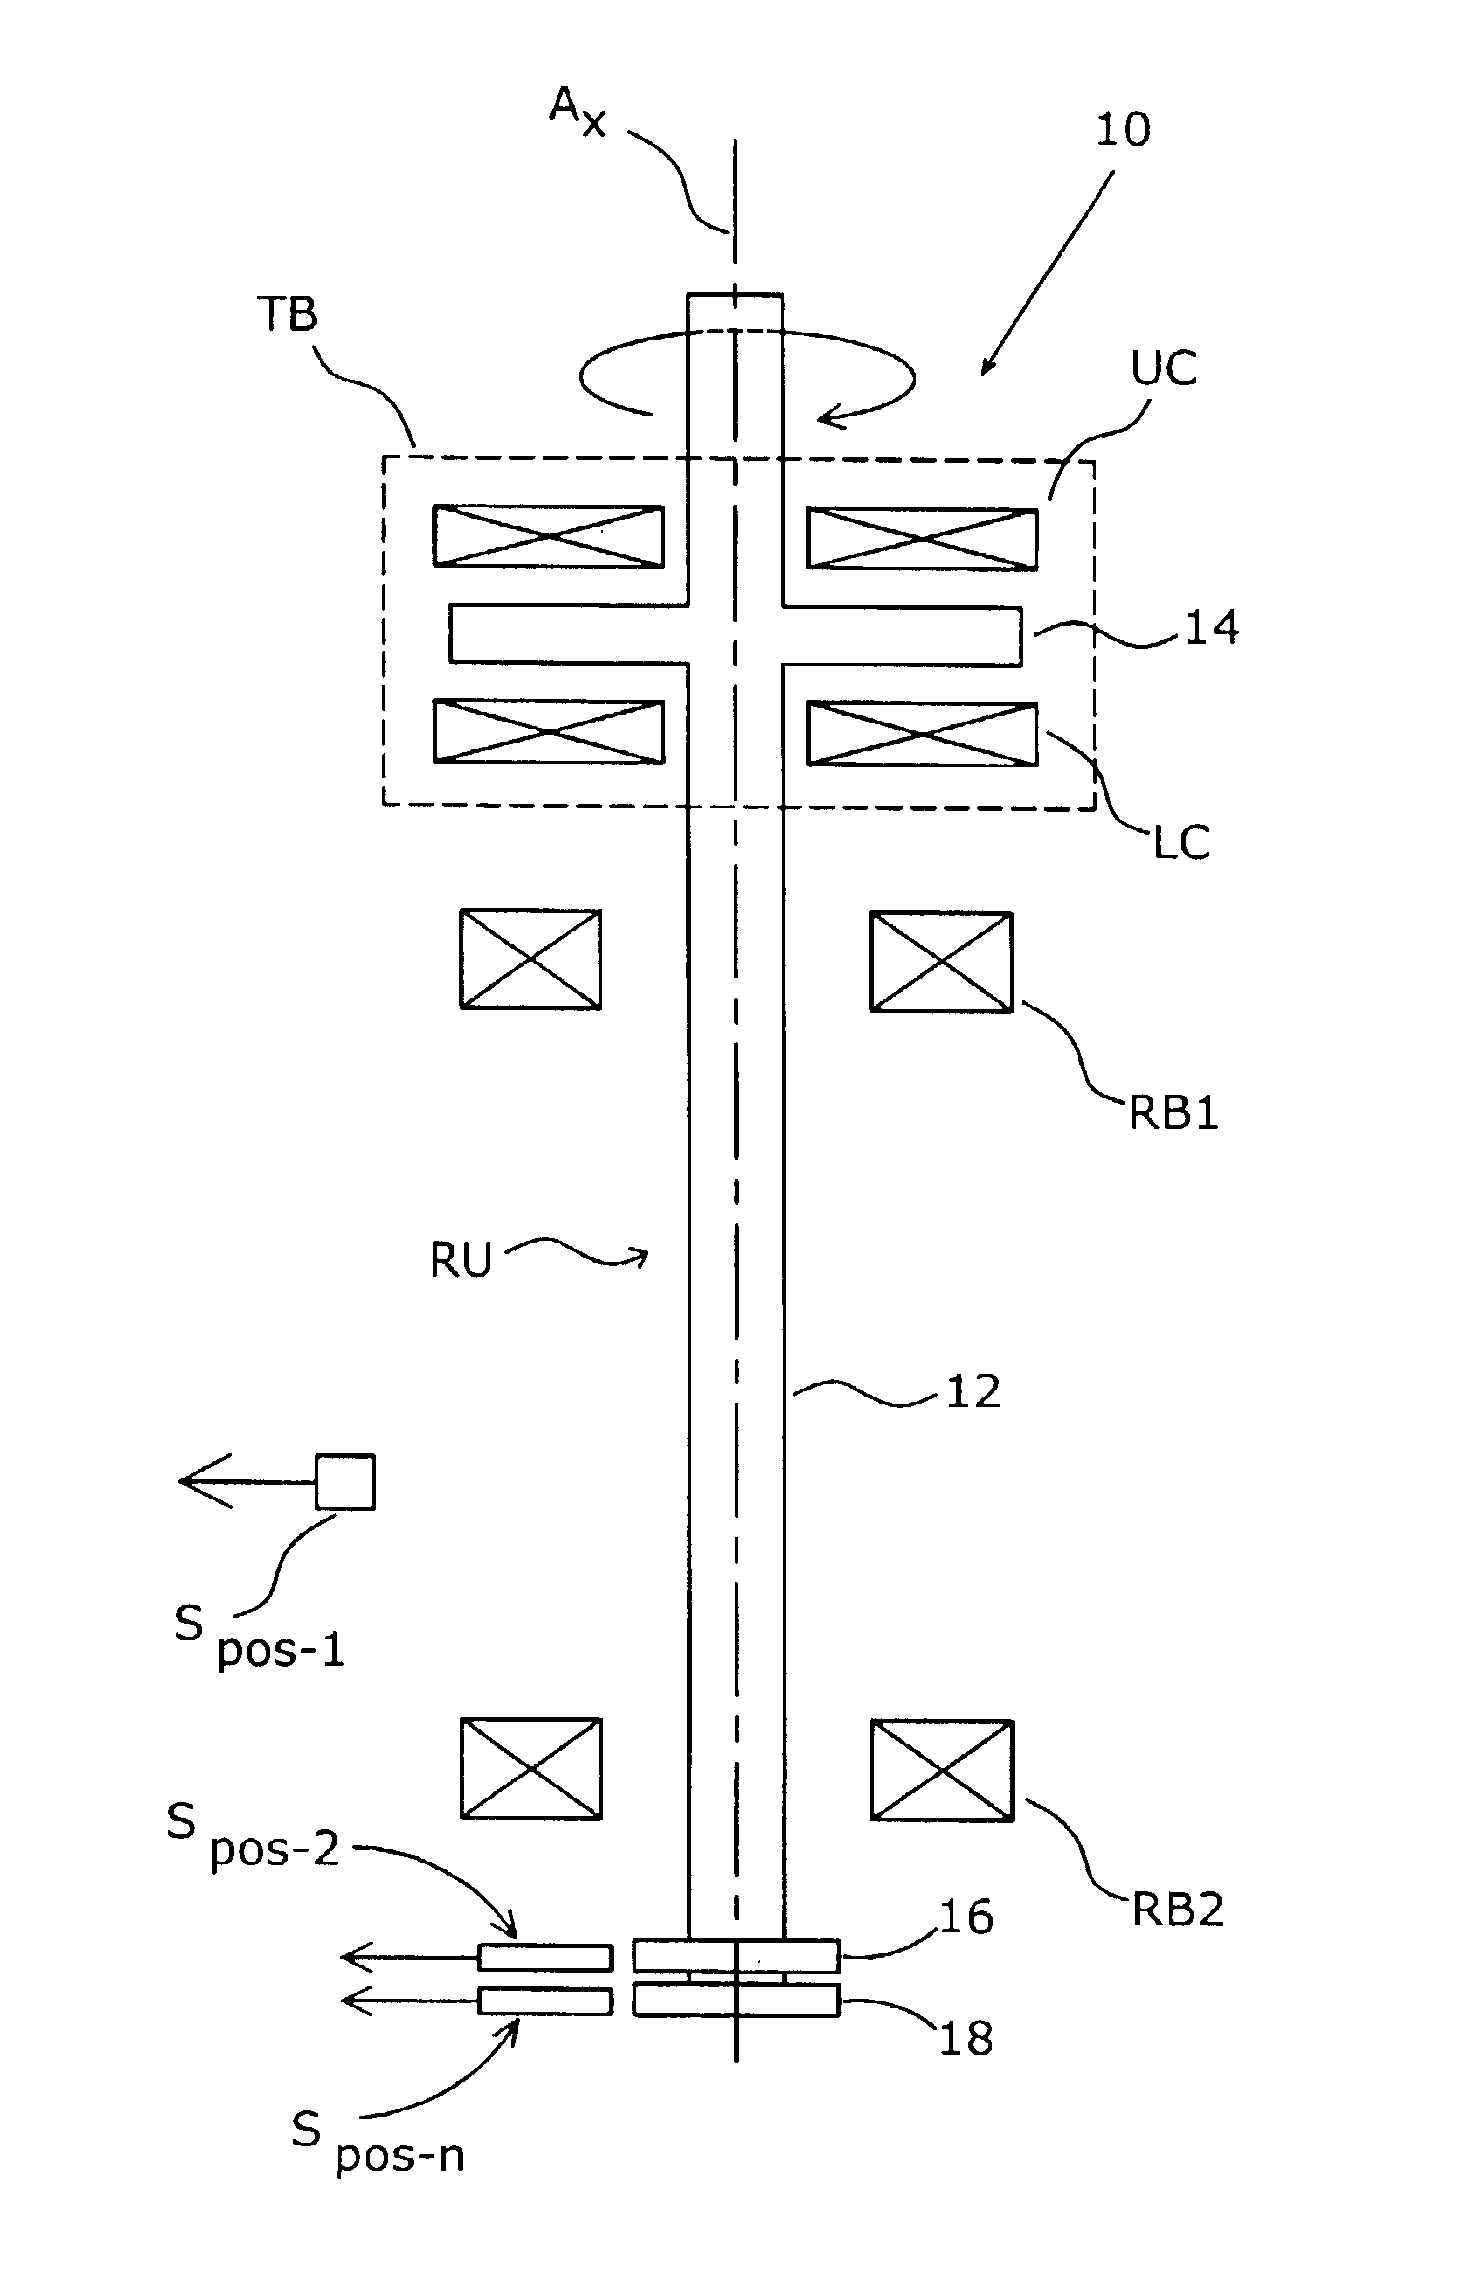 System for controlling a magnetically levitated rotor